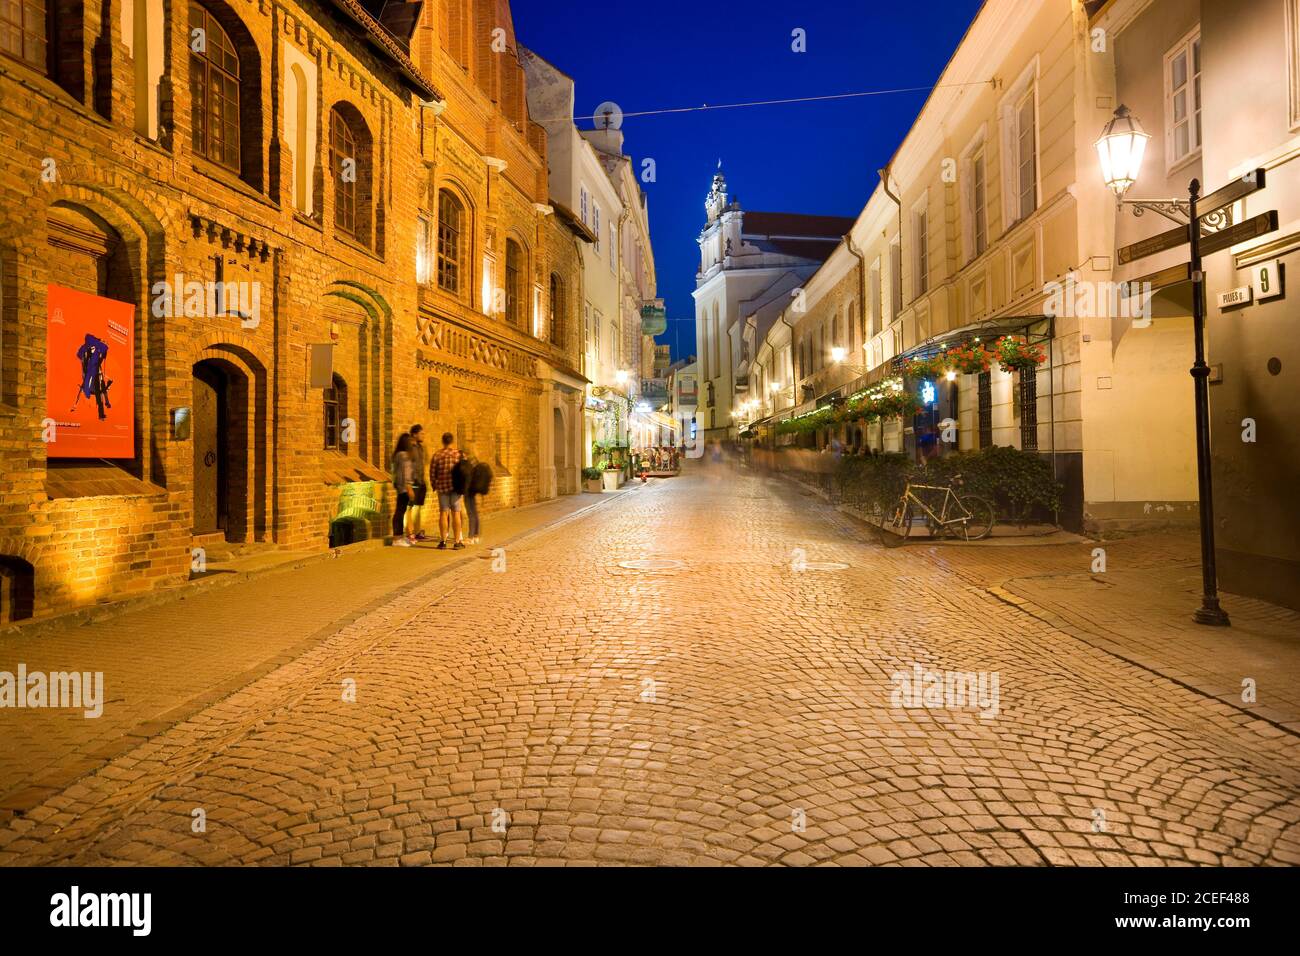 Night view of illuminated Pilies Street in the Old Town of Vilnius, Lithuania. Church of St. Johns in the background. Stock Photo